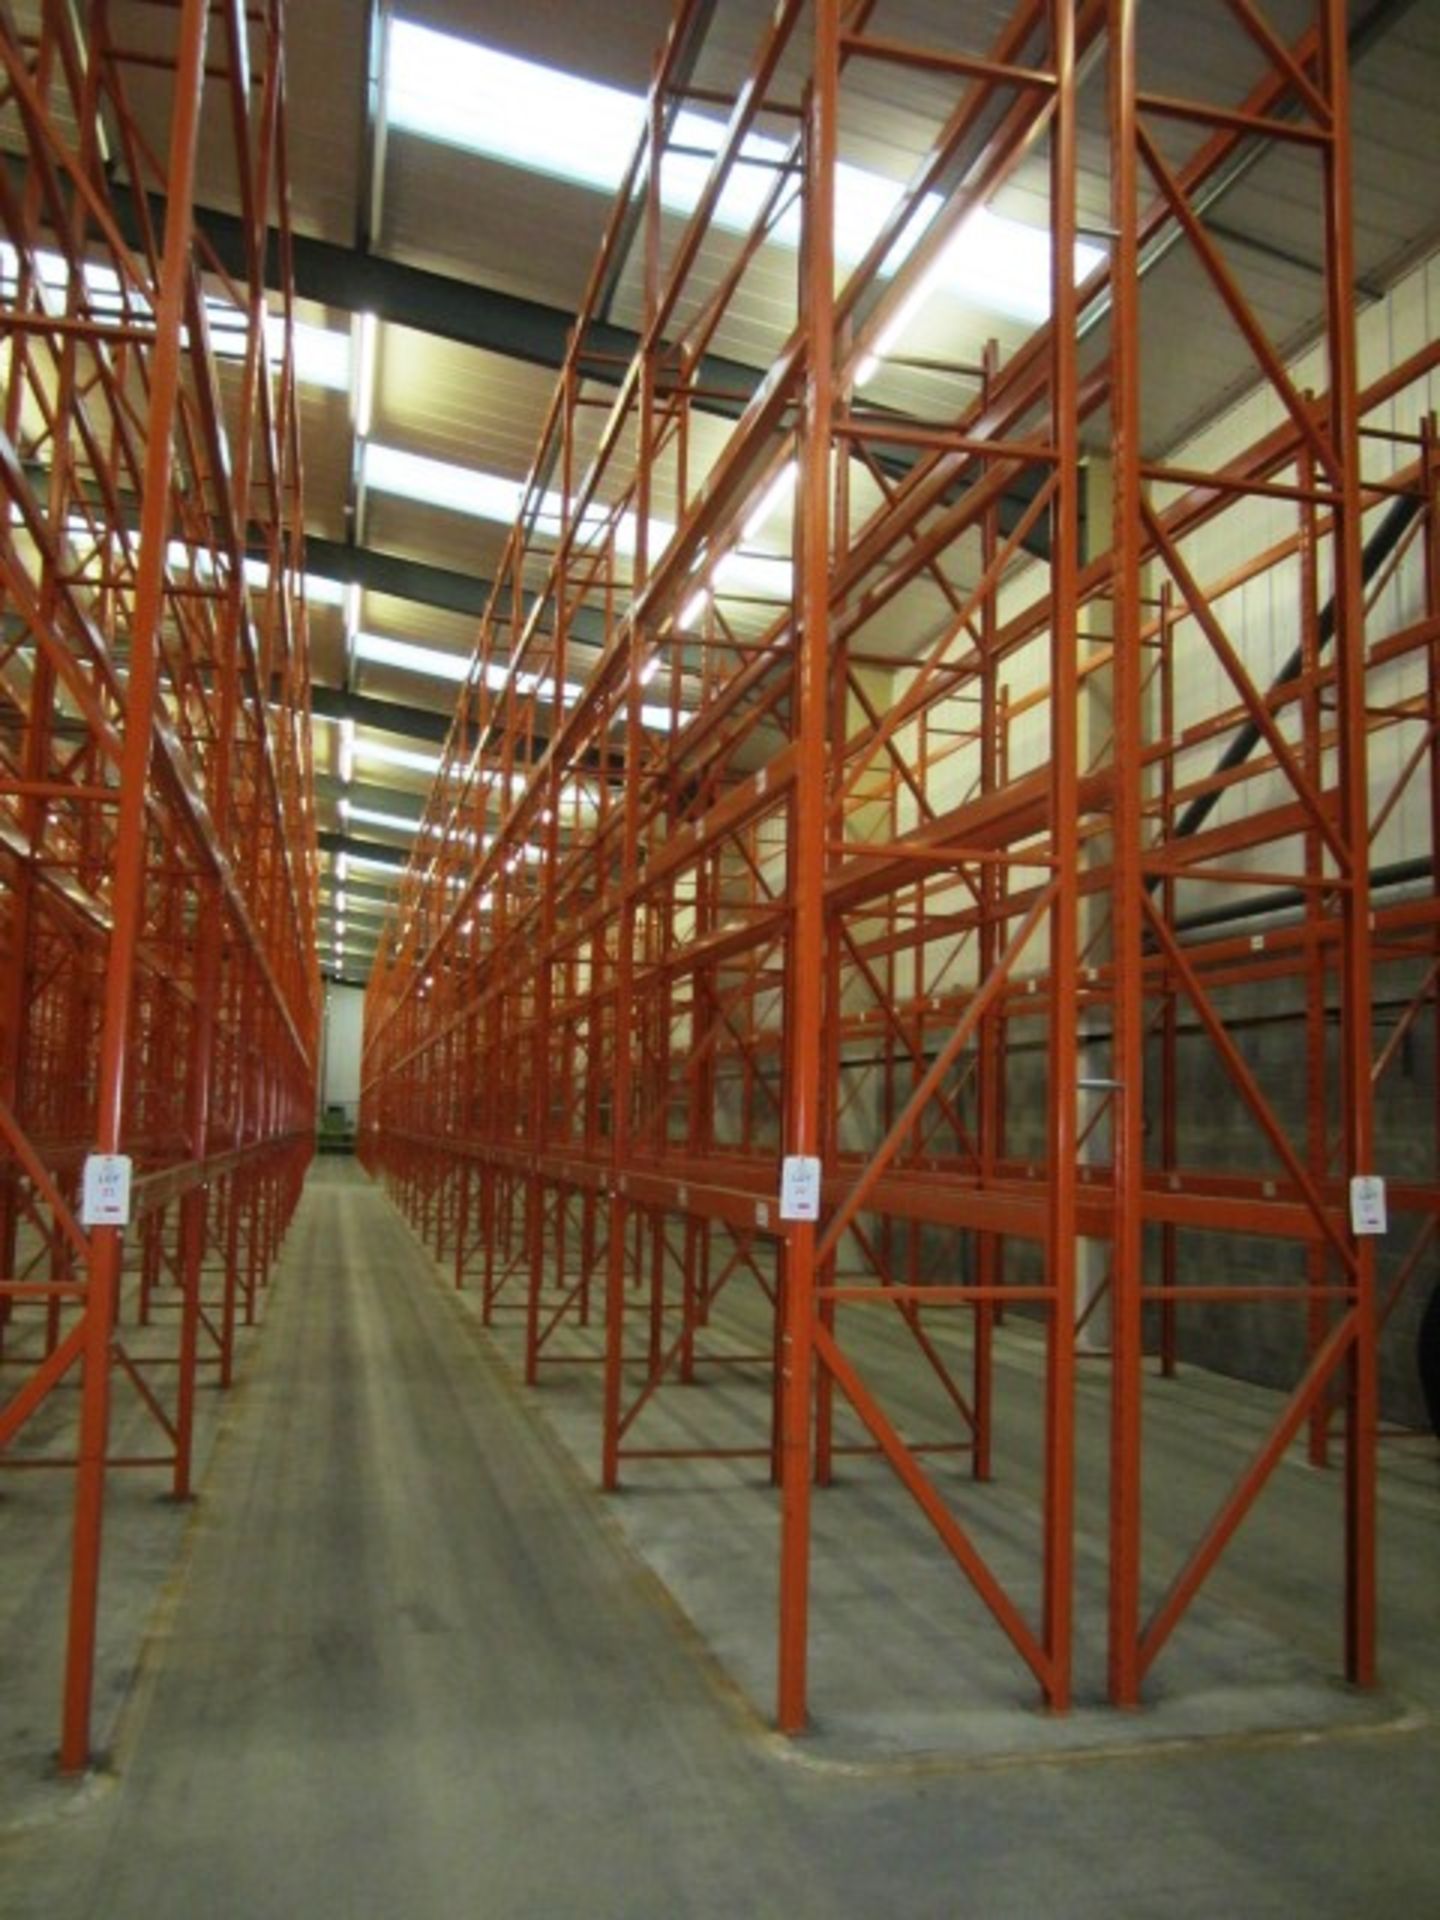 11 bays of Redirack boltless pallet racking, approx. sizes depth 800mm x width 2,750mm x Height 7m -